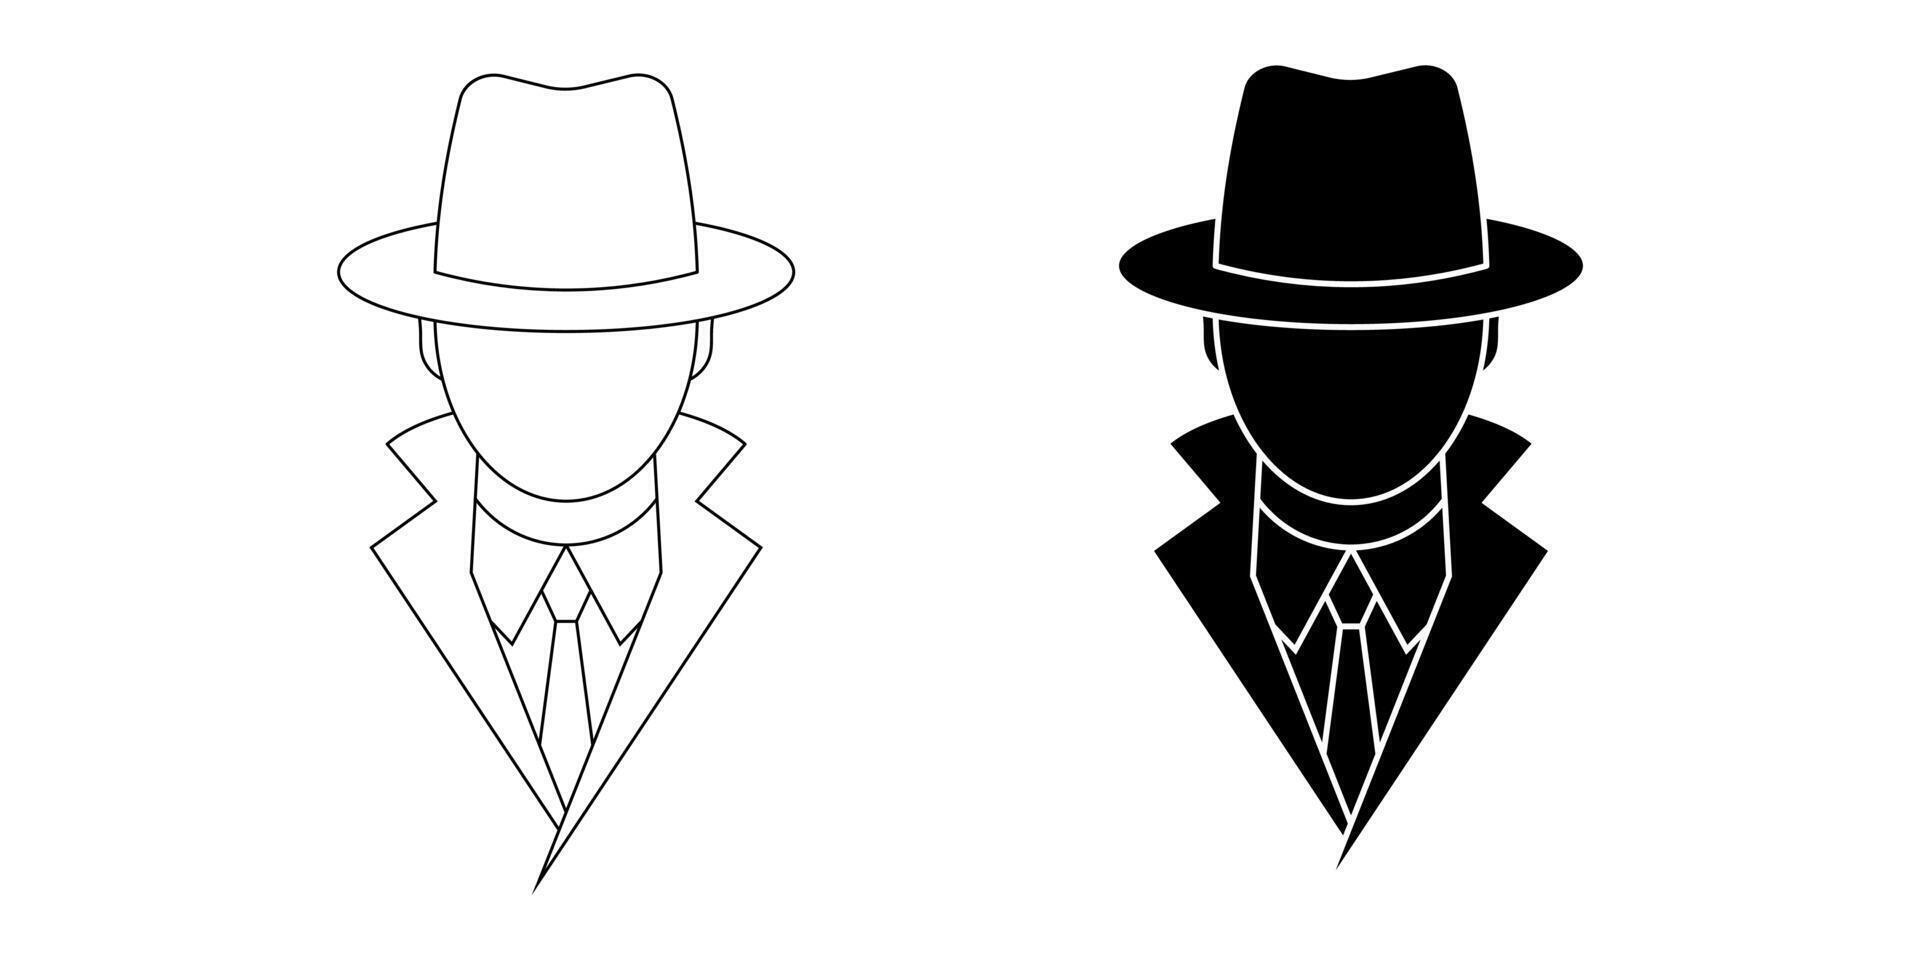 outline silhouette Detective avatar icon set isolated on white background vector